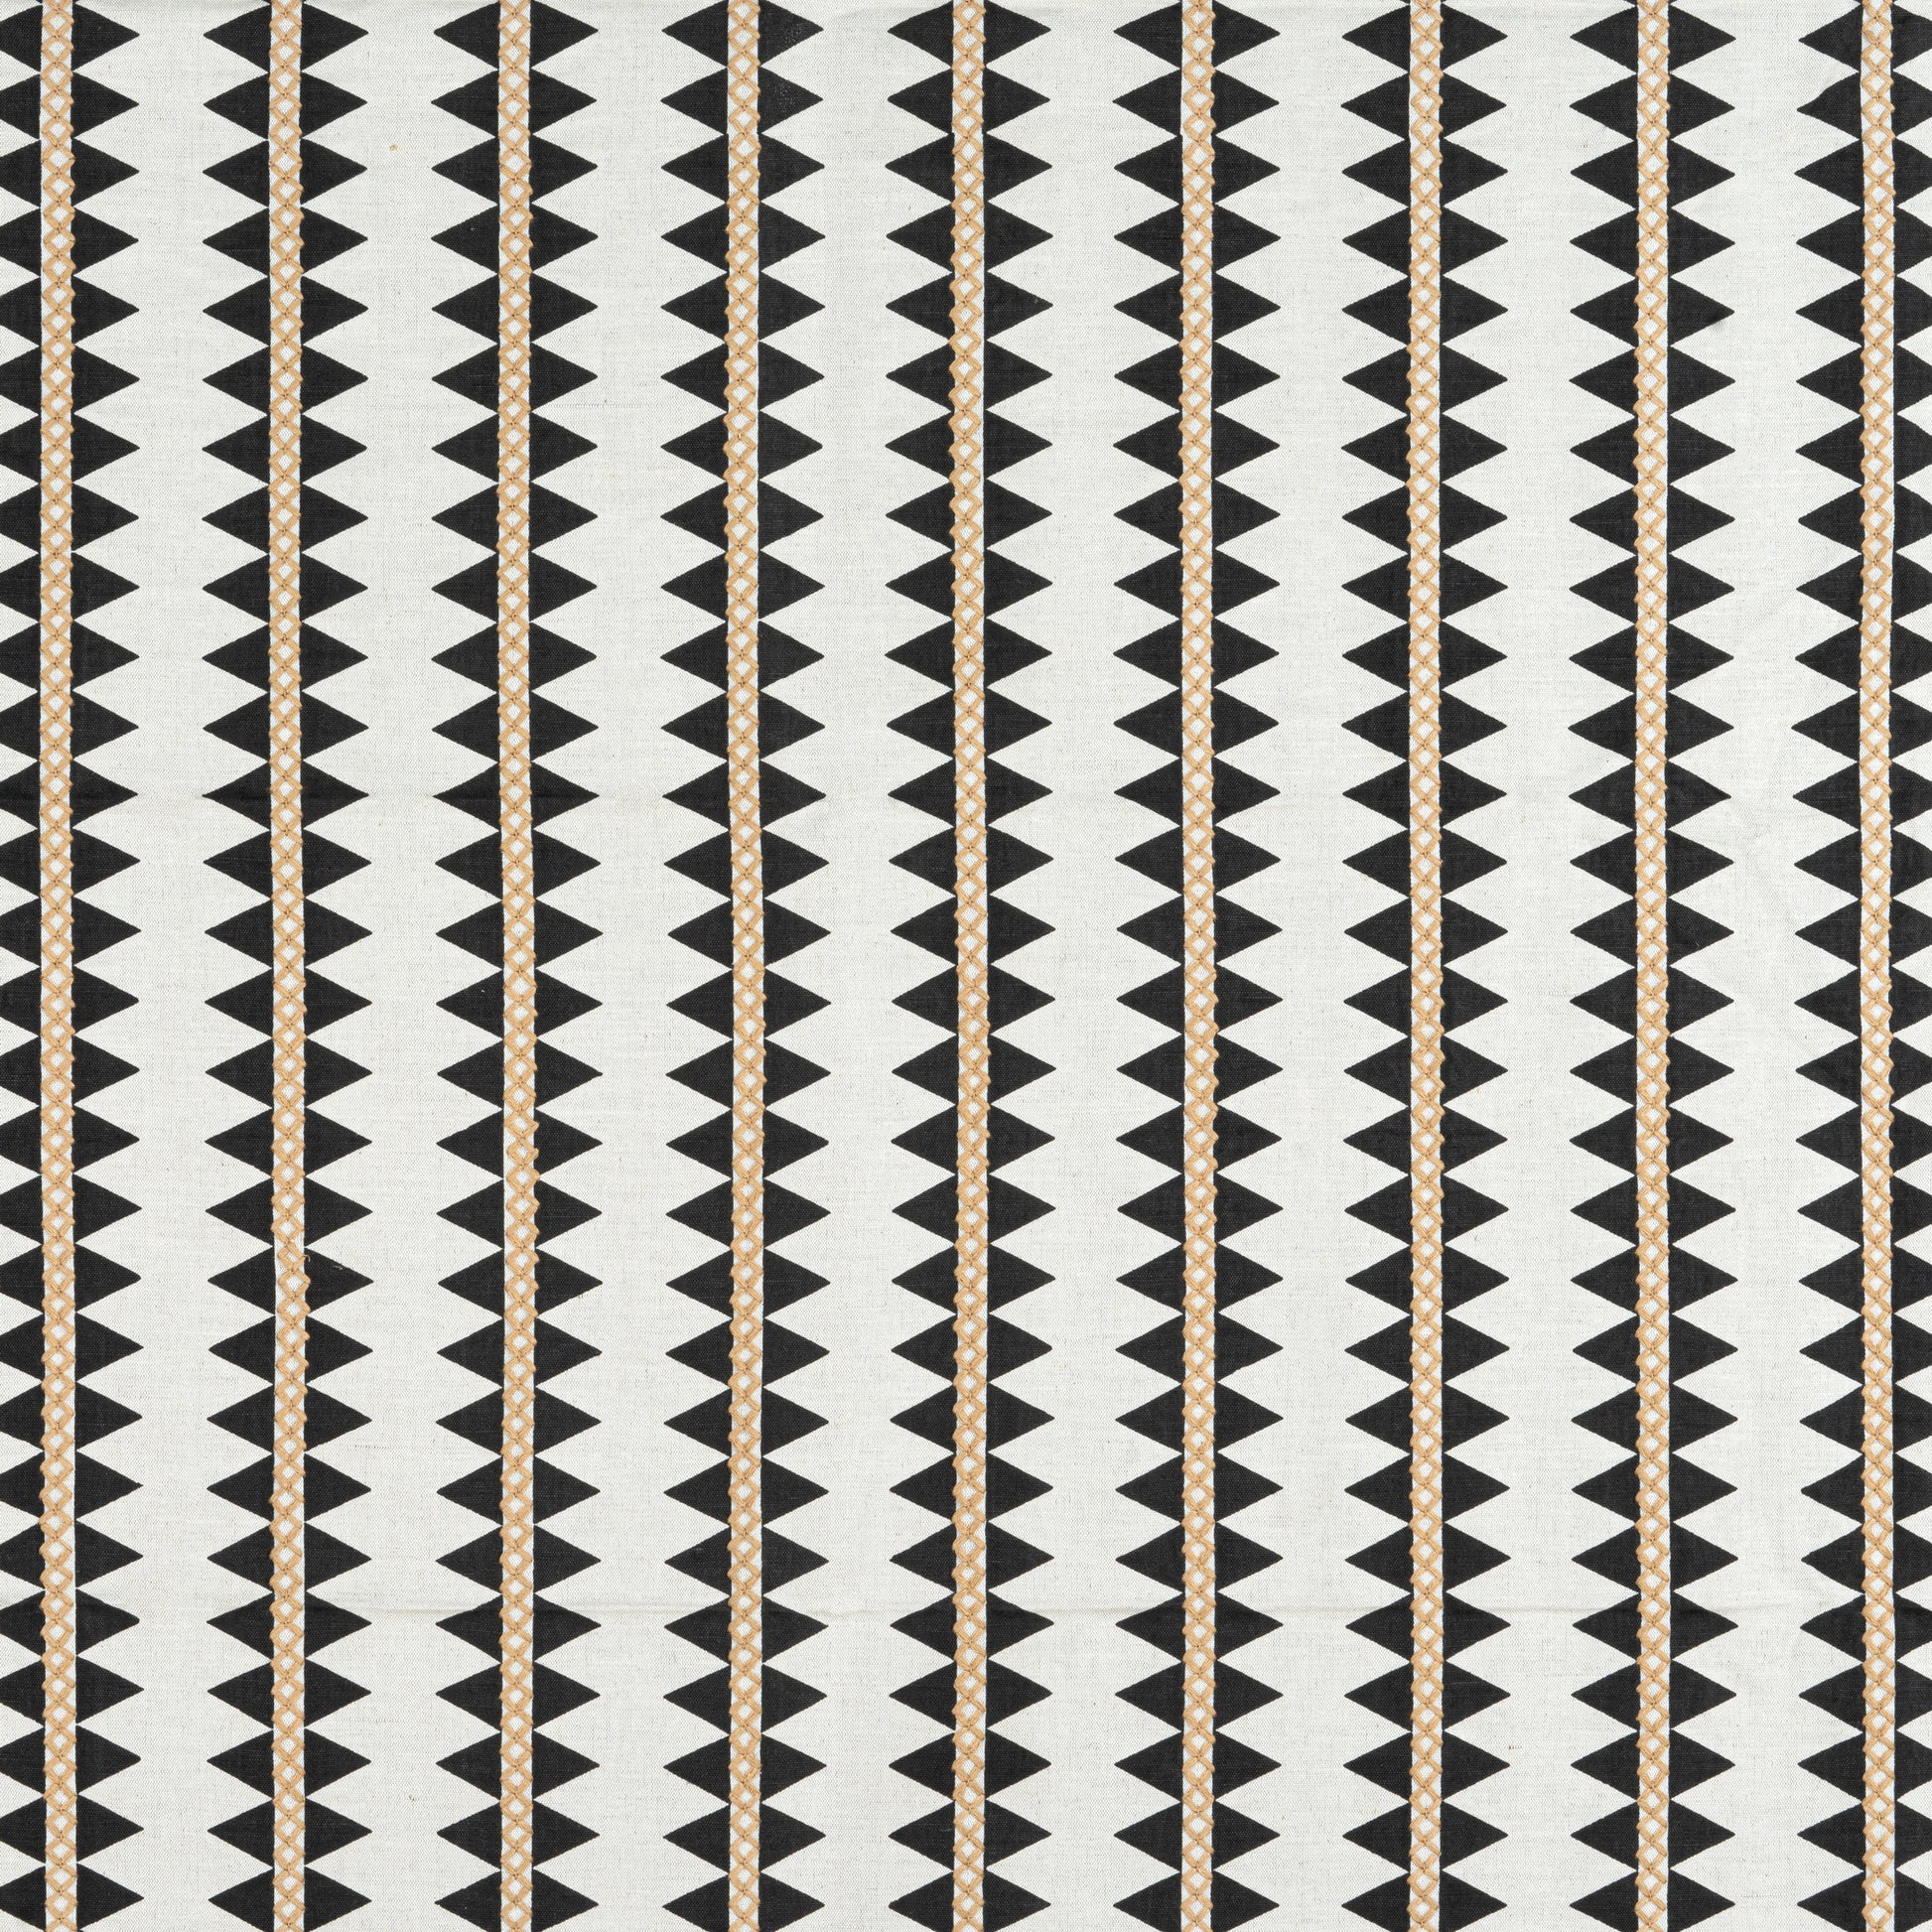 Purchase Thibaut Fabric Pattern# W713240 pattern name Reno Stripe Embroidery color Black